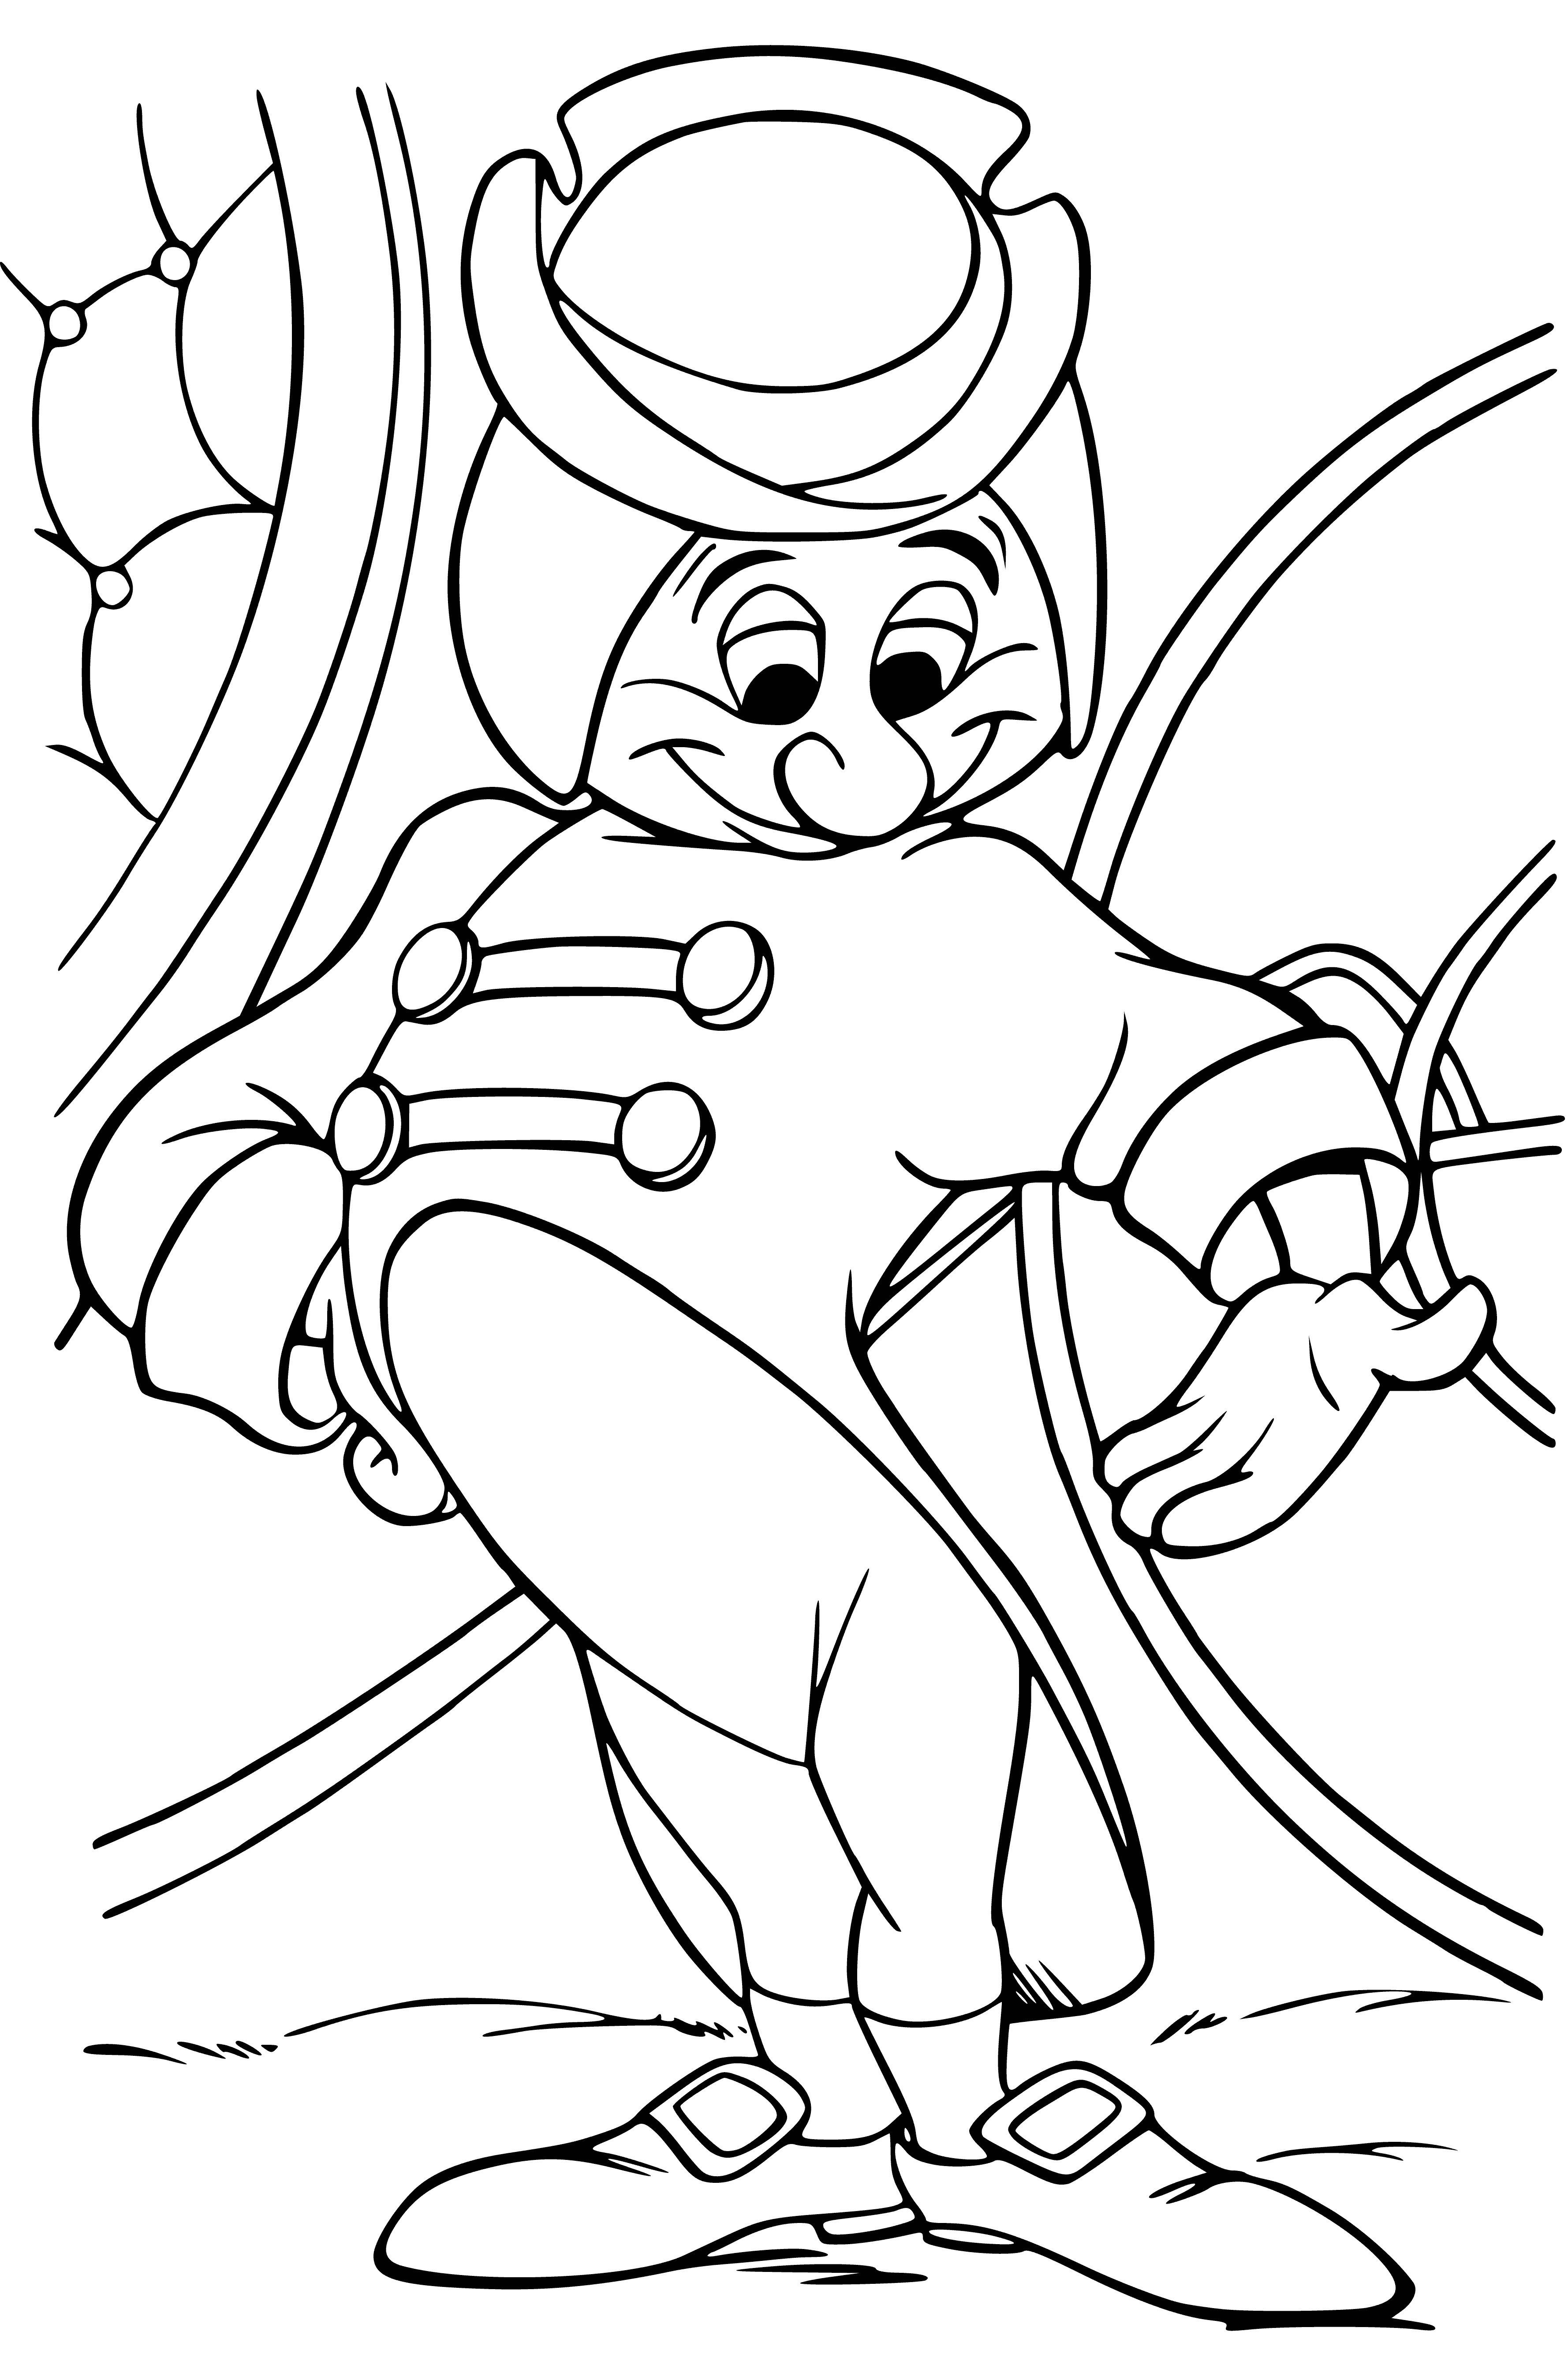 coloring page: Cinderella suffered, clothes in rags, despair in her eyes, and mice in her hair.